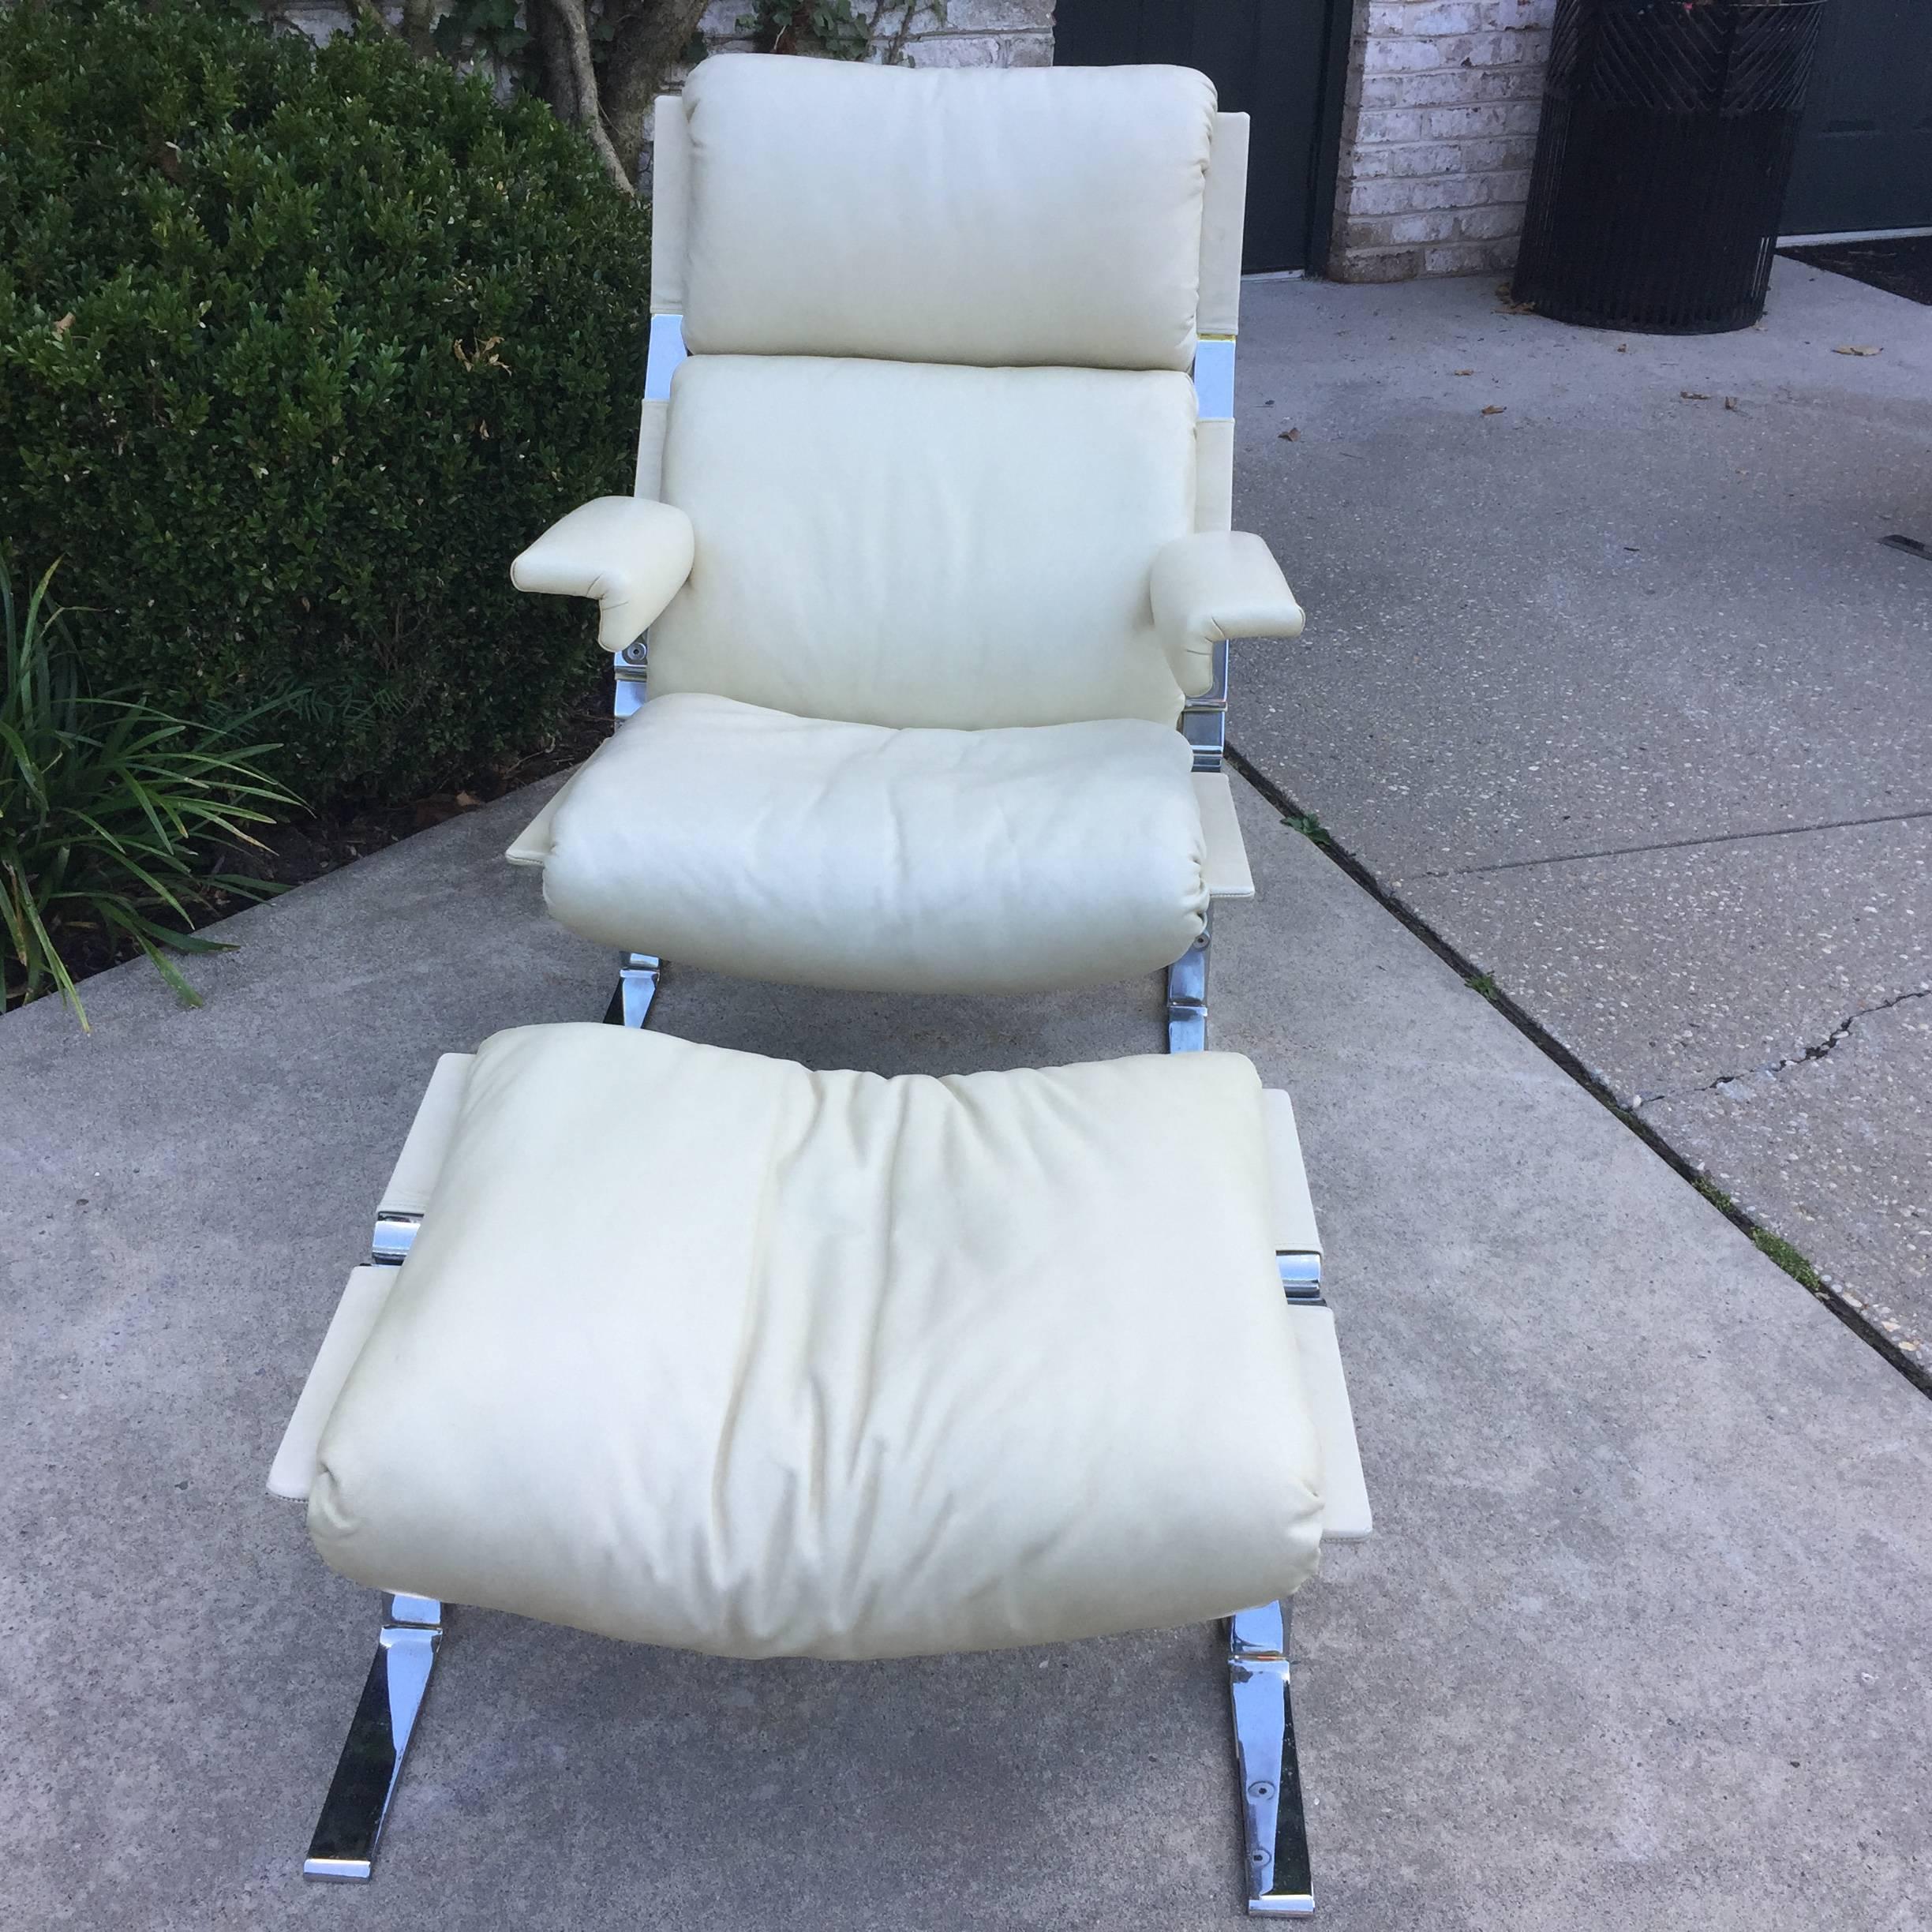 Original ivory leather on this vintage Saporiti lounger and ottoman. Very heavy steel framed and comfortable lounge chair with matching ottoman is made in Switzerland by Saporiti. Ottoman dimensions are: 26 inches wide, 18.5 inches deep, 17 inches